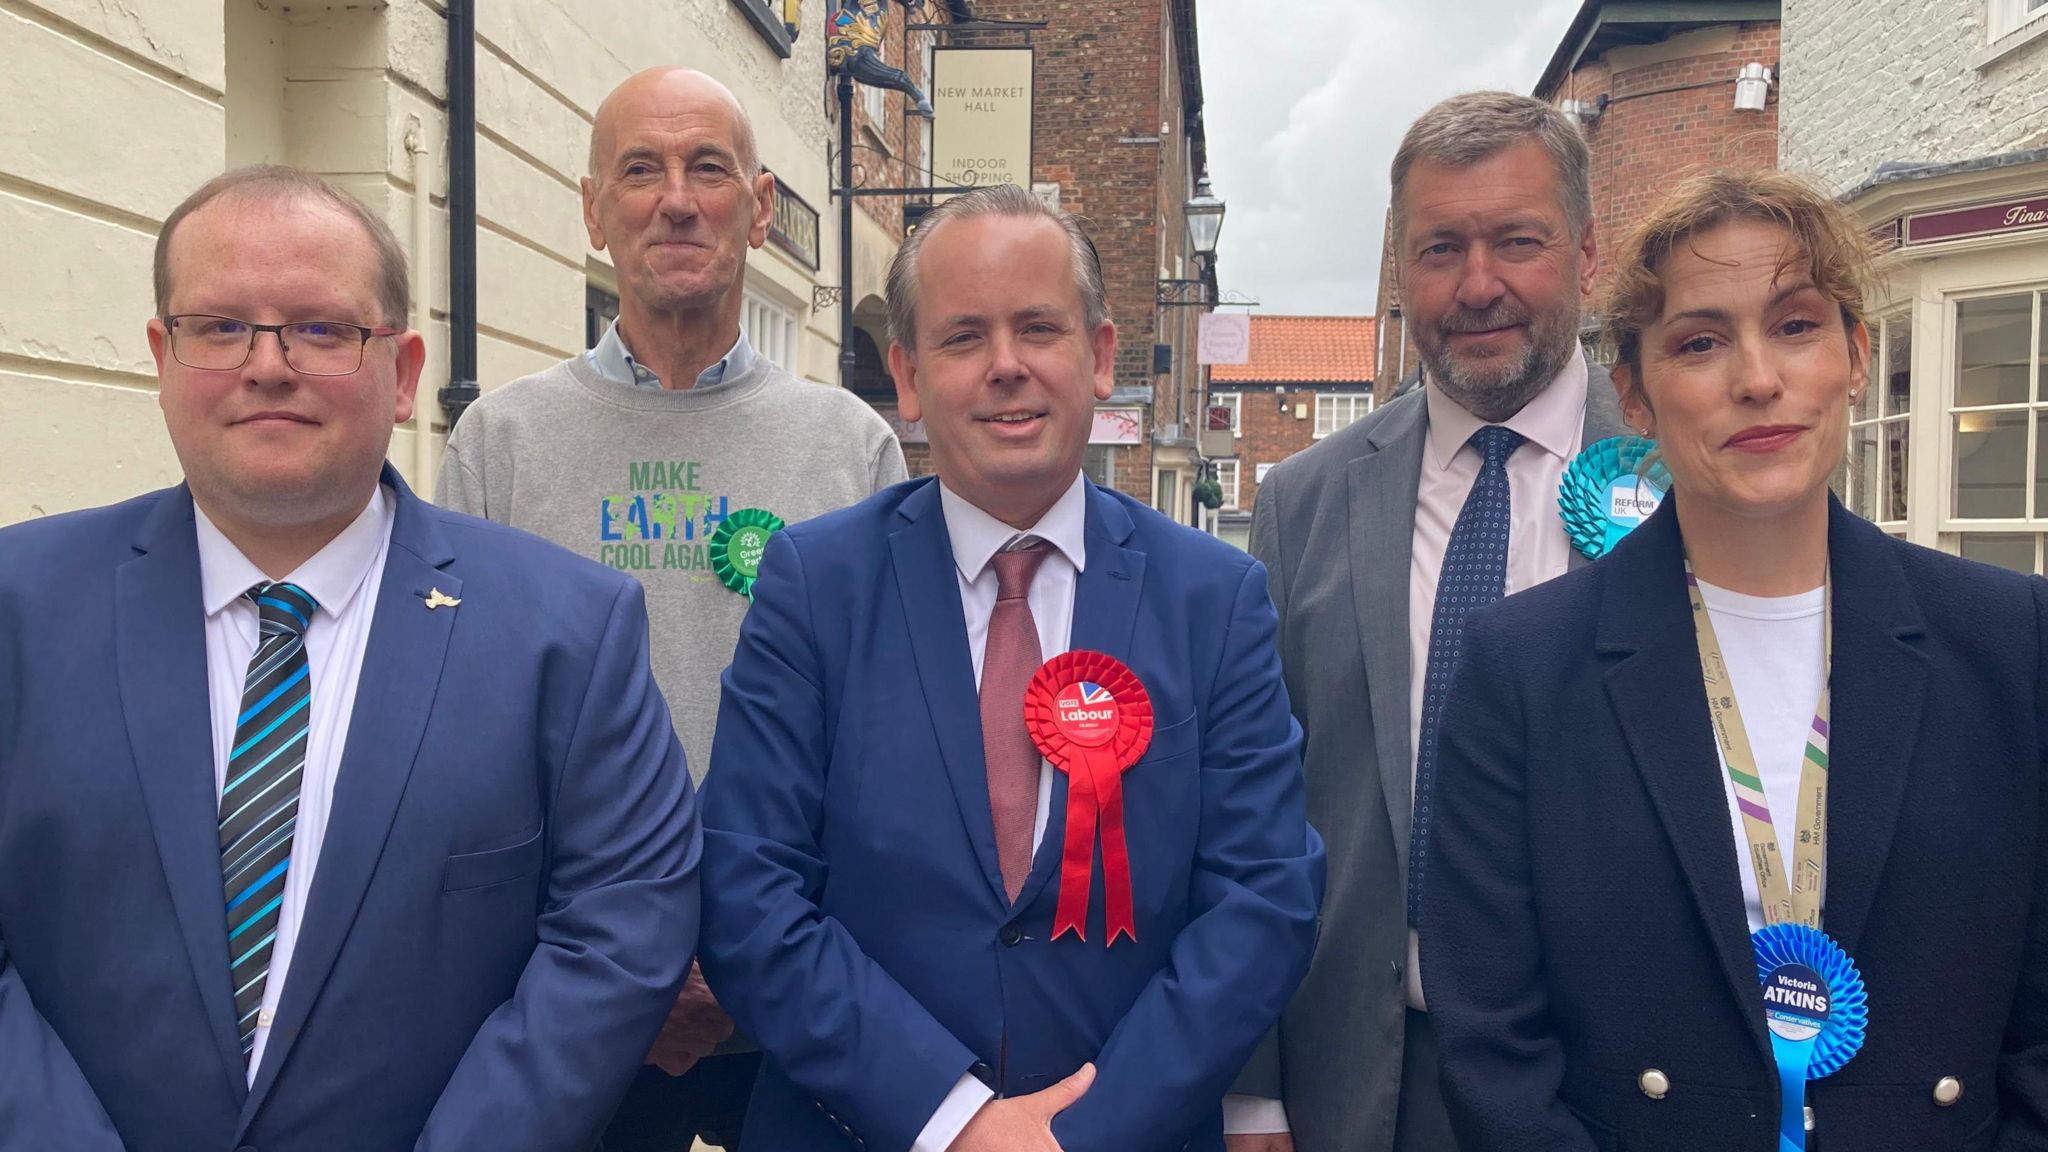 Editorial candidates standing together, from left, Ross Pepper, Robert Watson, Jonathan Slater, Sean Matthews and Victoria Atkins